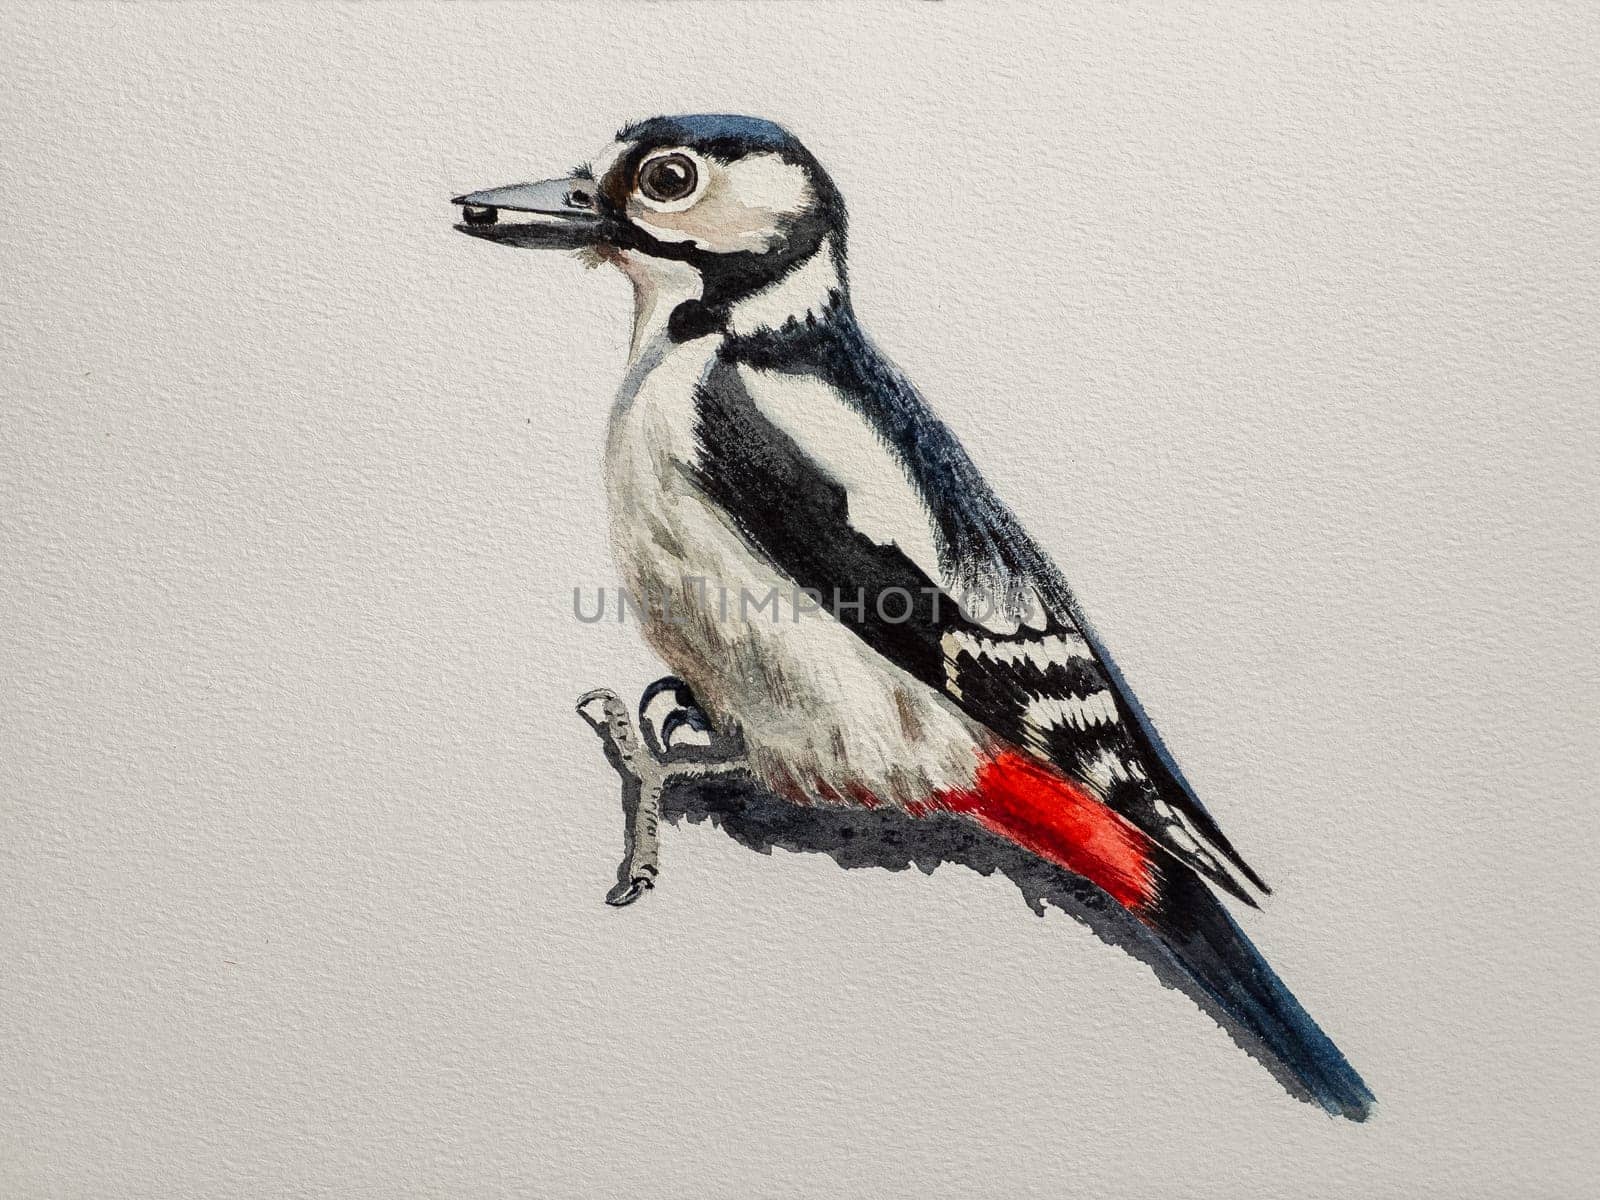 Step-by-step drawing of woodpecker bird with watercolor. Step three of four - final watercolor painting of bird. Woodpecker painting in watercolor. Side view of female great spotted woodpecker